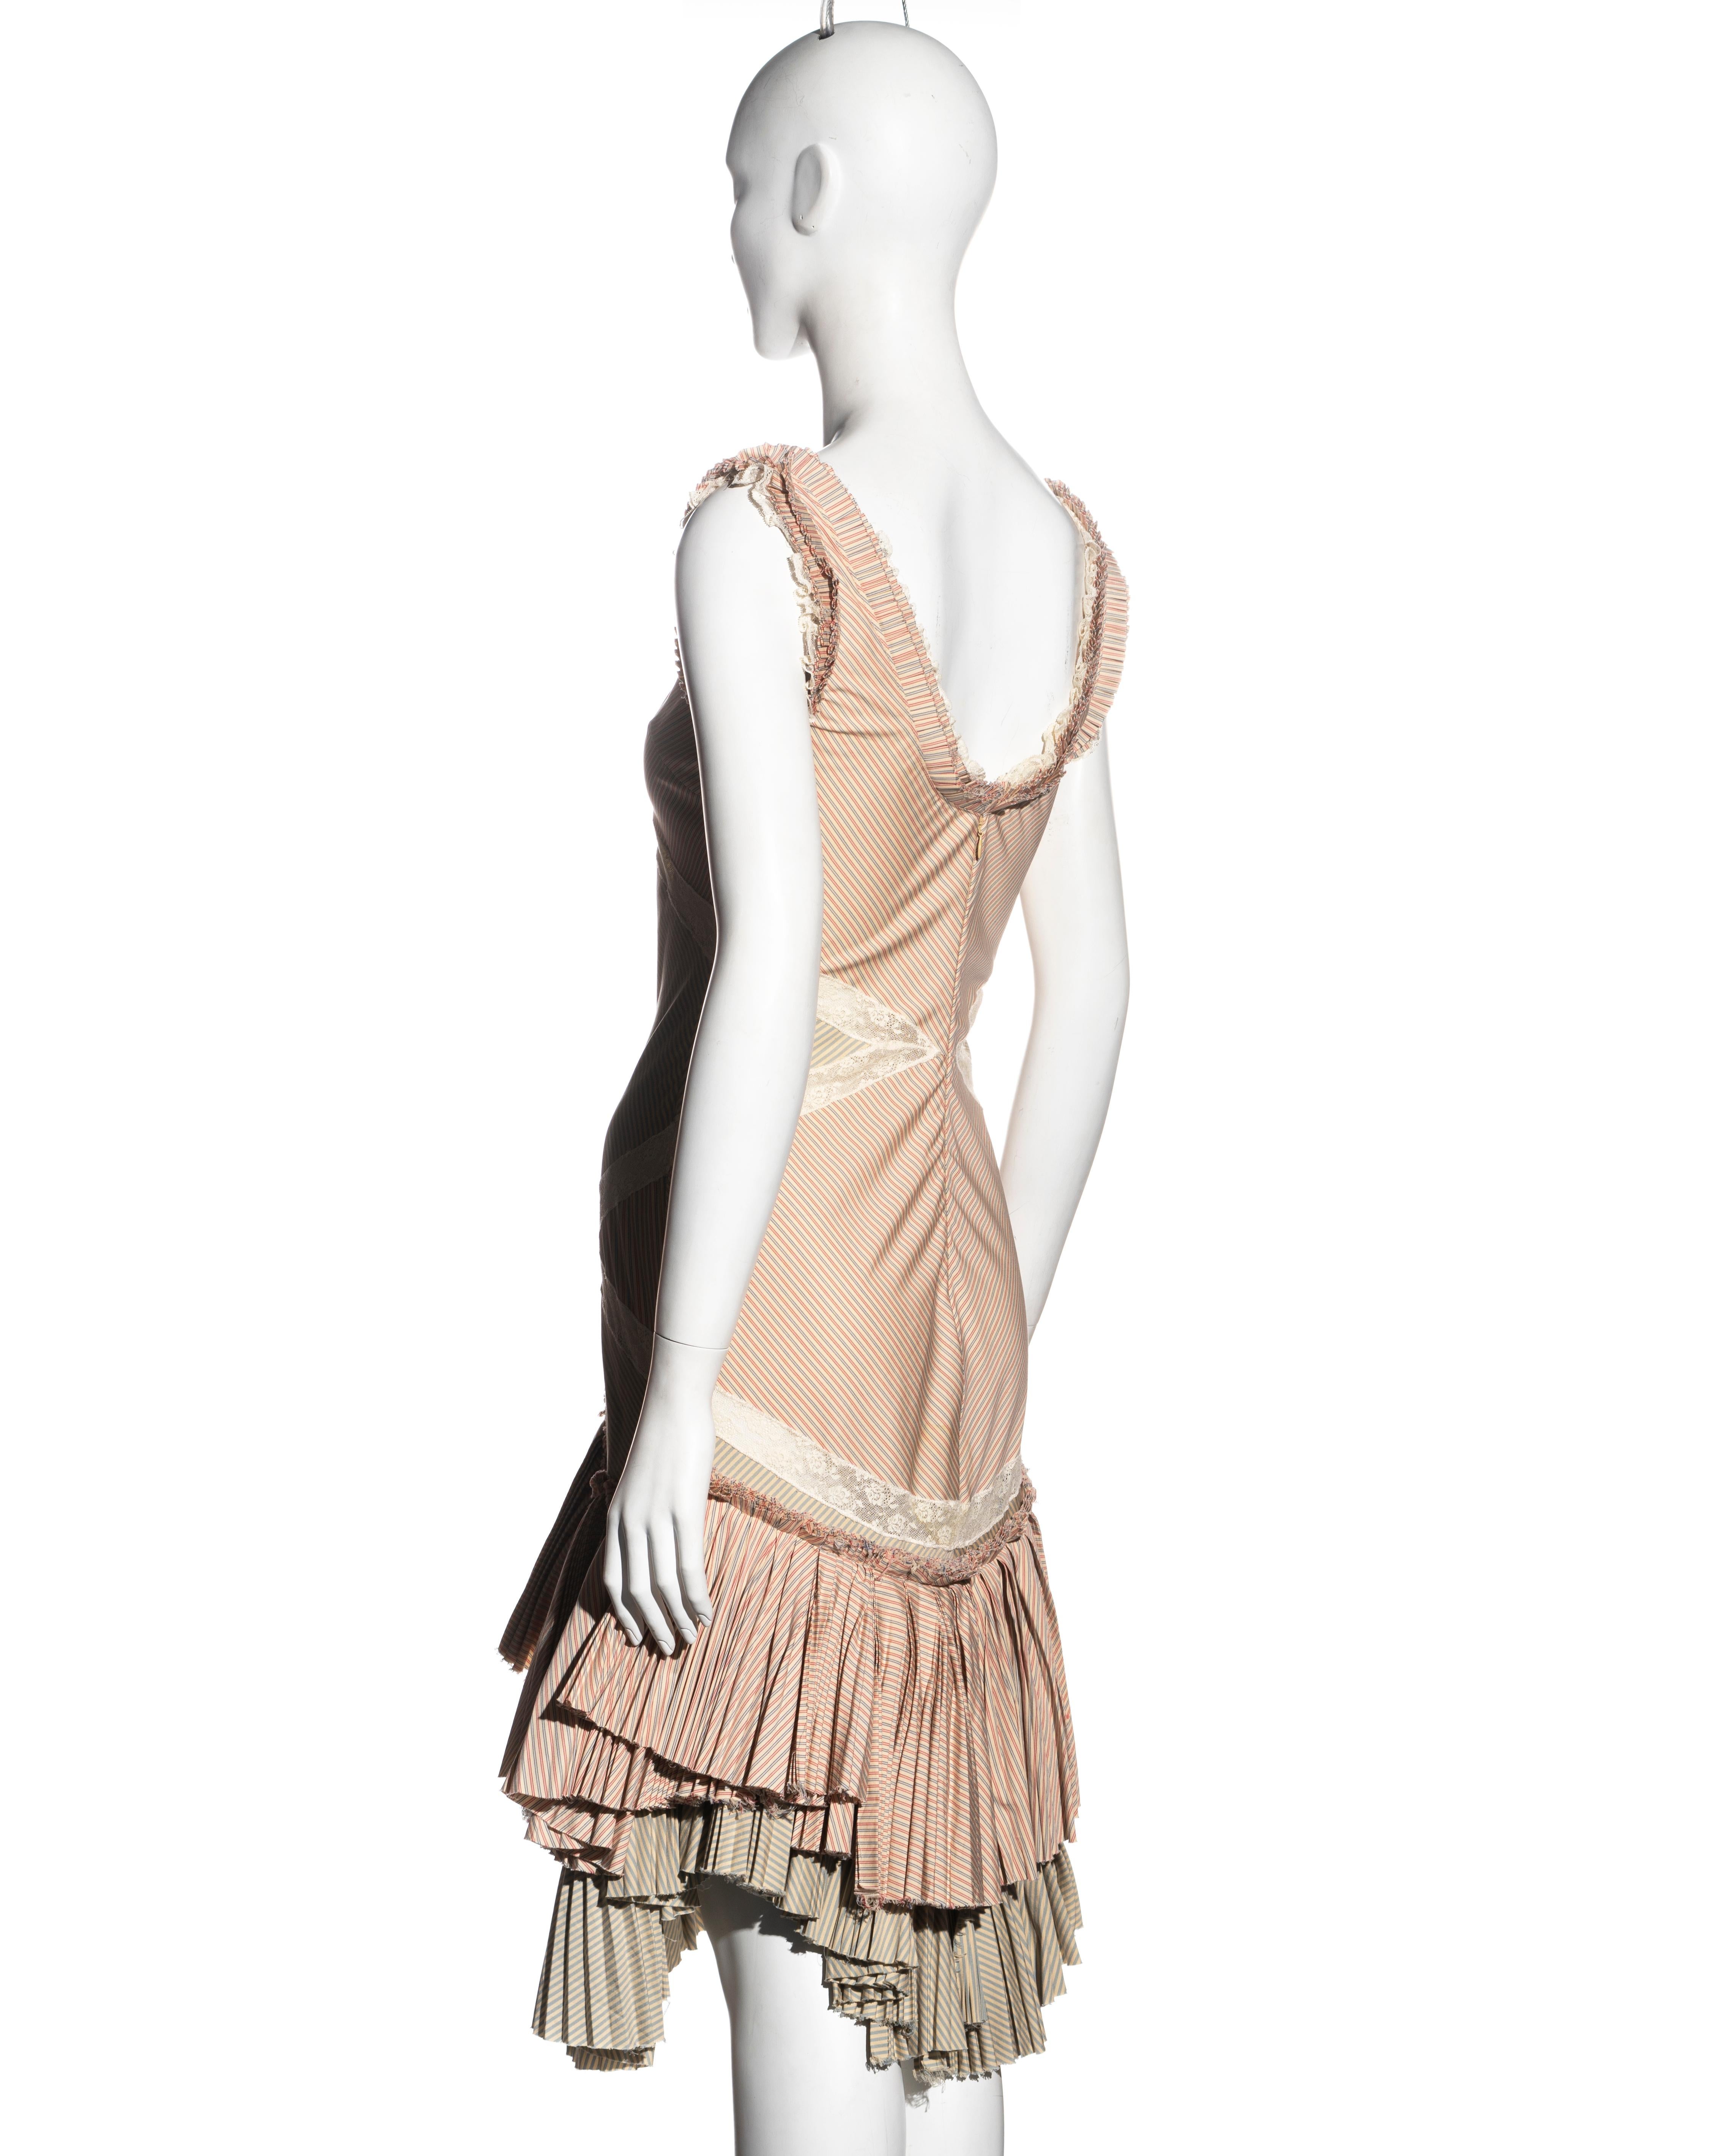 Alexander McQueen striped cotton and lace dress with pleated skirt, ss 2005 For Sale 4